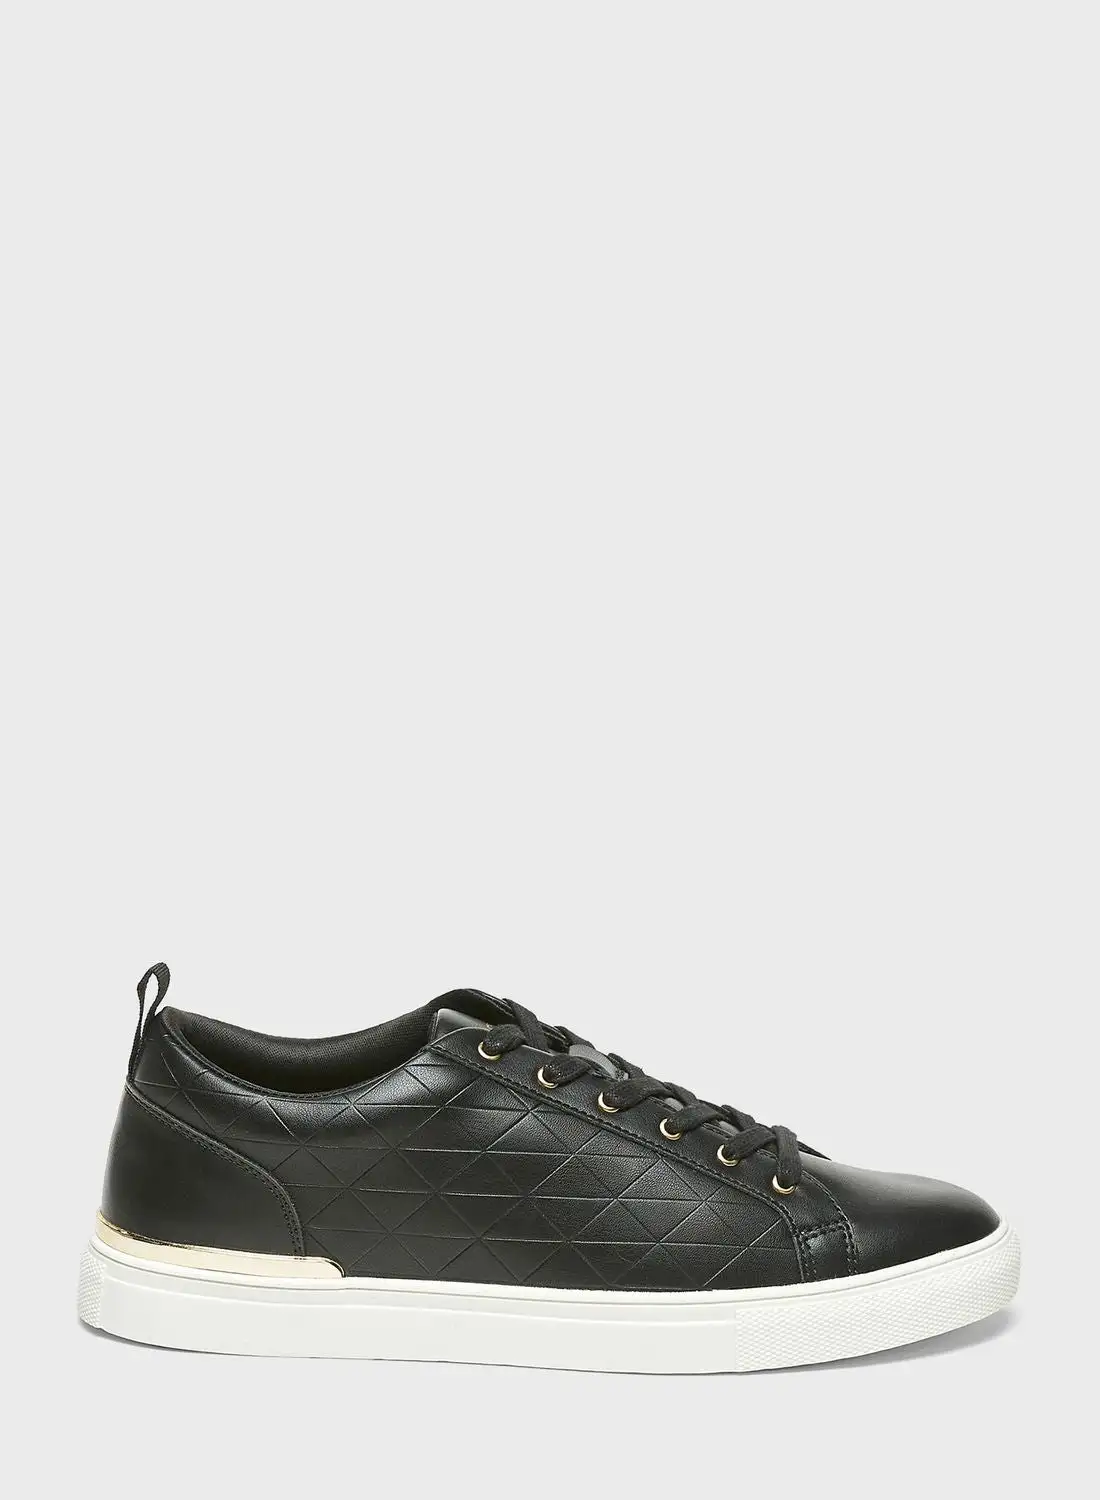 Celeste Lace Up Low Top Sneakers